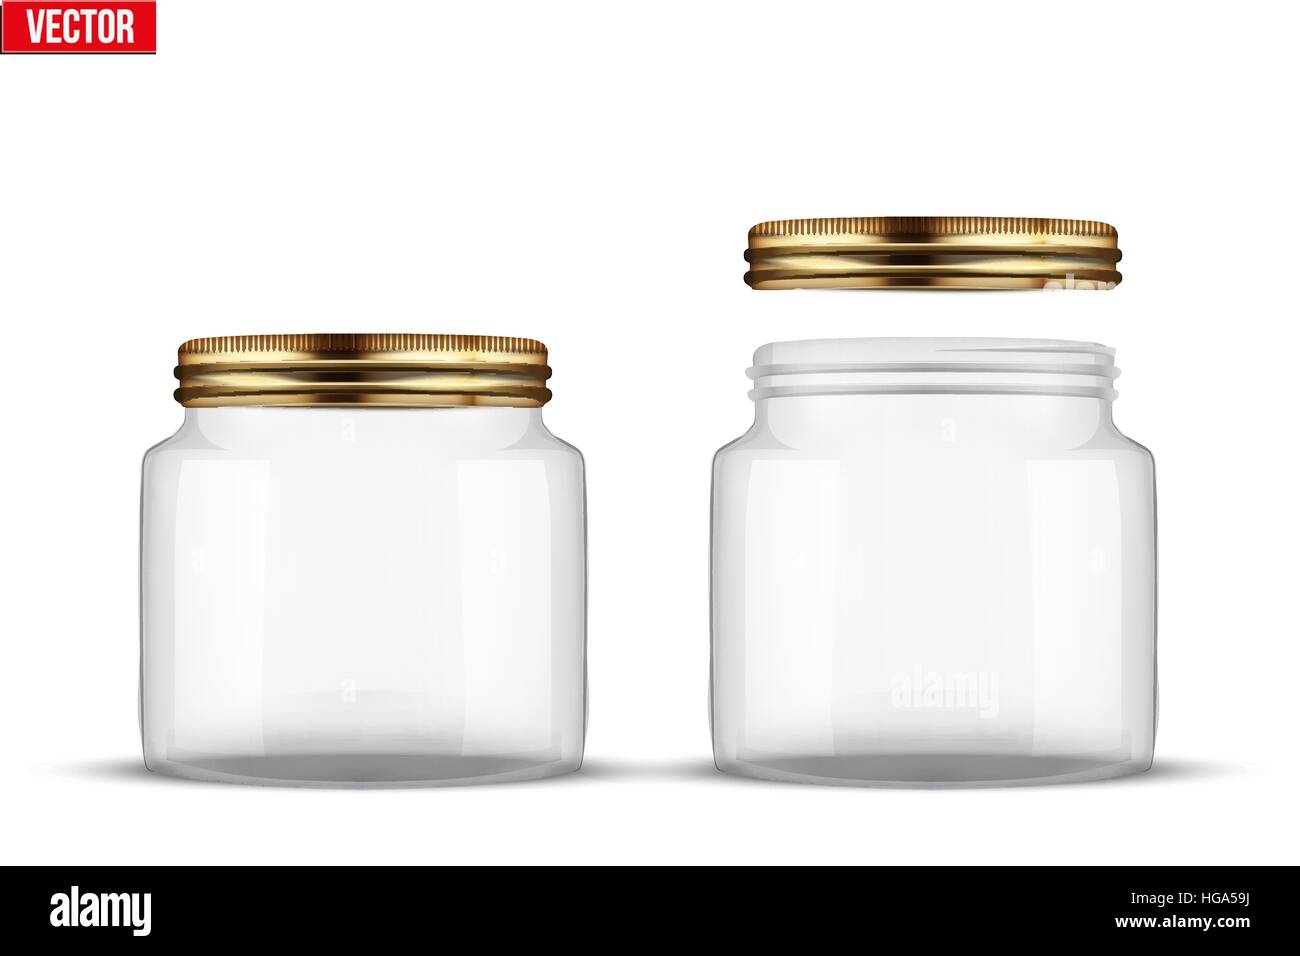 https://c8.alamy.com/comp/HGA59J/set-of-glass-jars-for-canning-and-preserving-square-shape-with-right-HGA59J.jpg